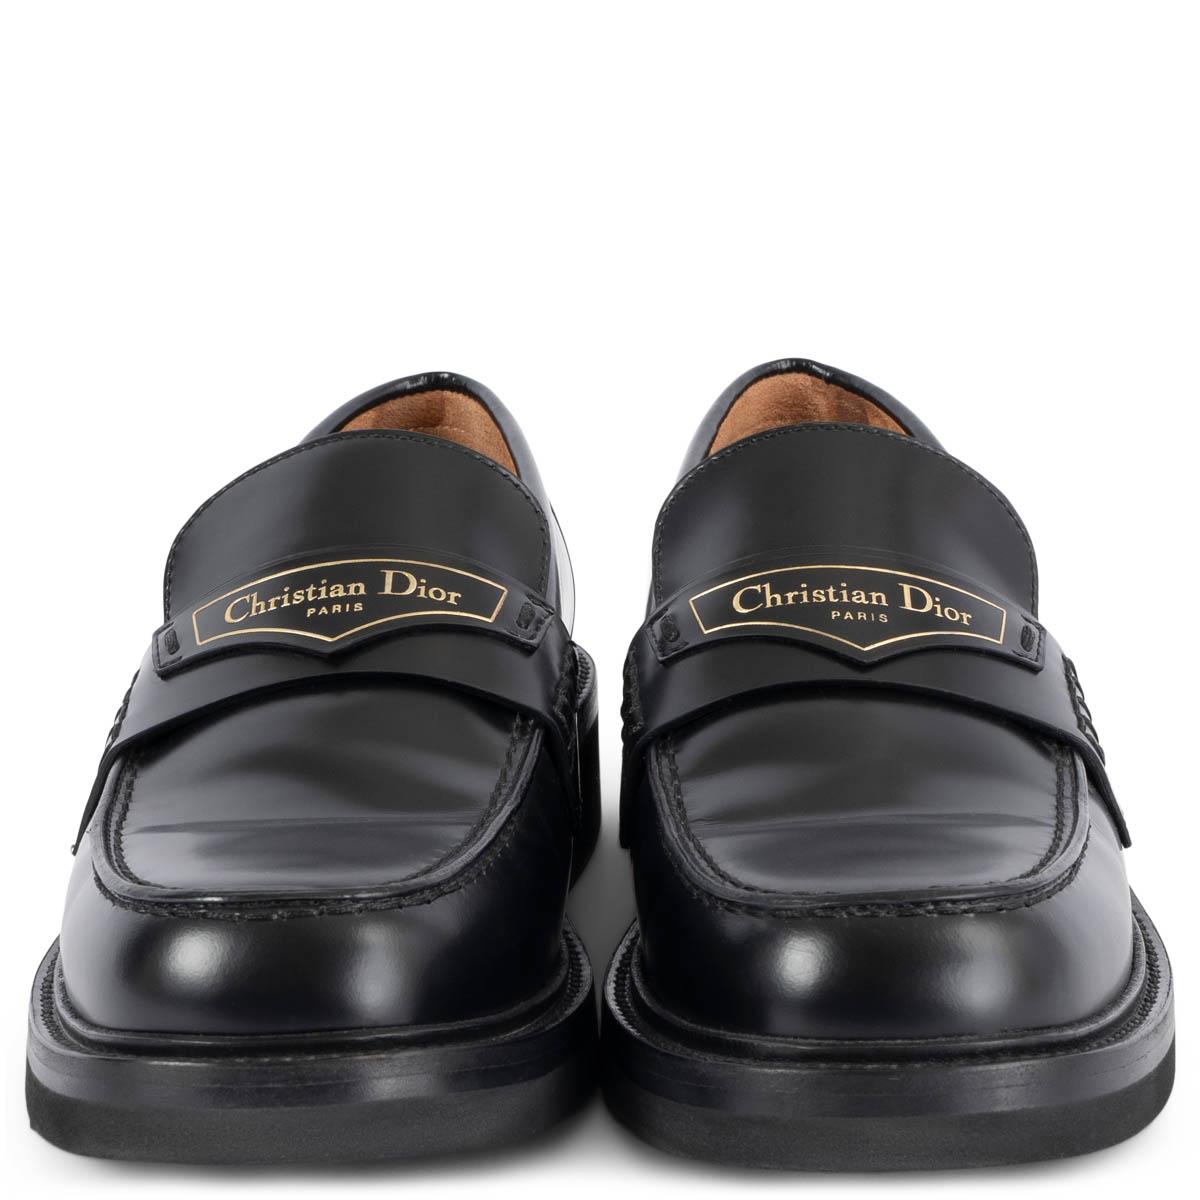 100% authentic Christian Dior Boy loafers in black calfskin featuring gold-tone 'Christian Dior PARIS' signature on a leather tag in the front and a black rubber sole. Have been worn once or twice and are in virtually new condition.